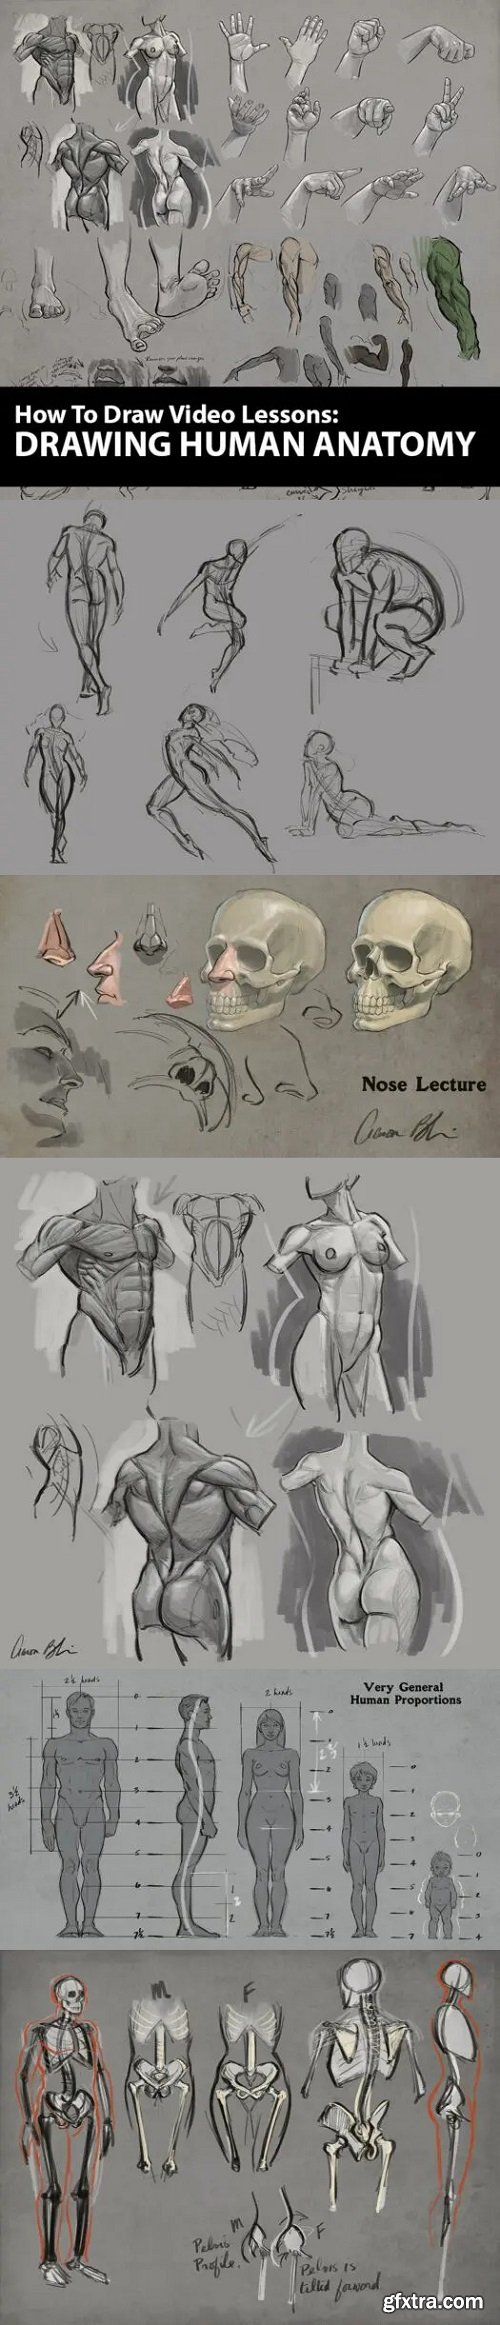 How to Draw: Drawing Human Anatomy by Aaron Blaise